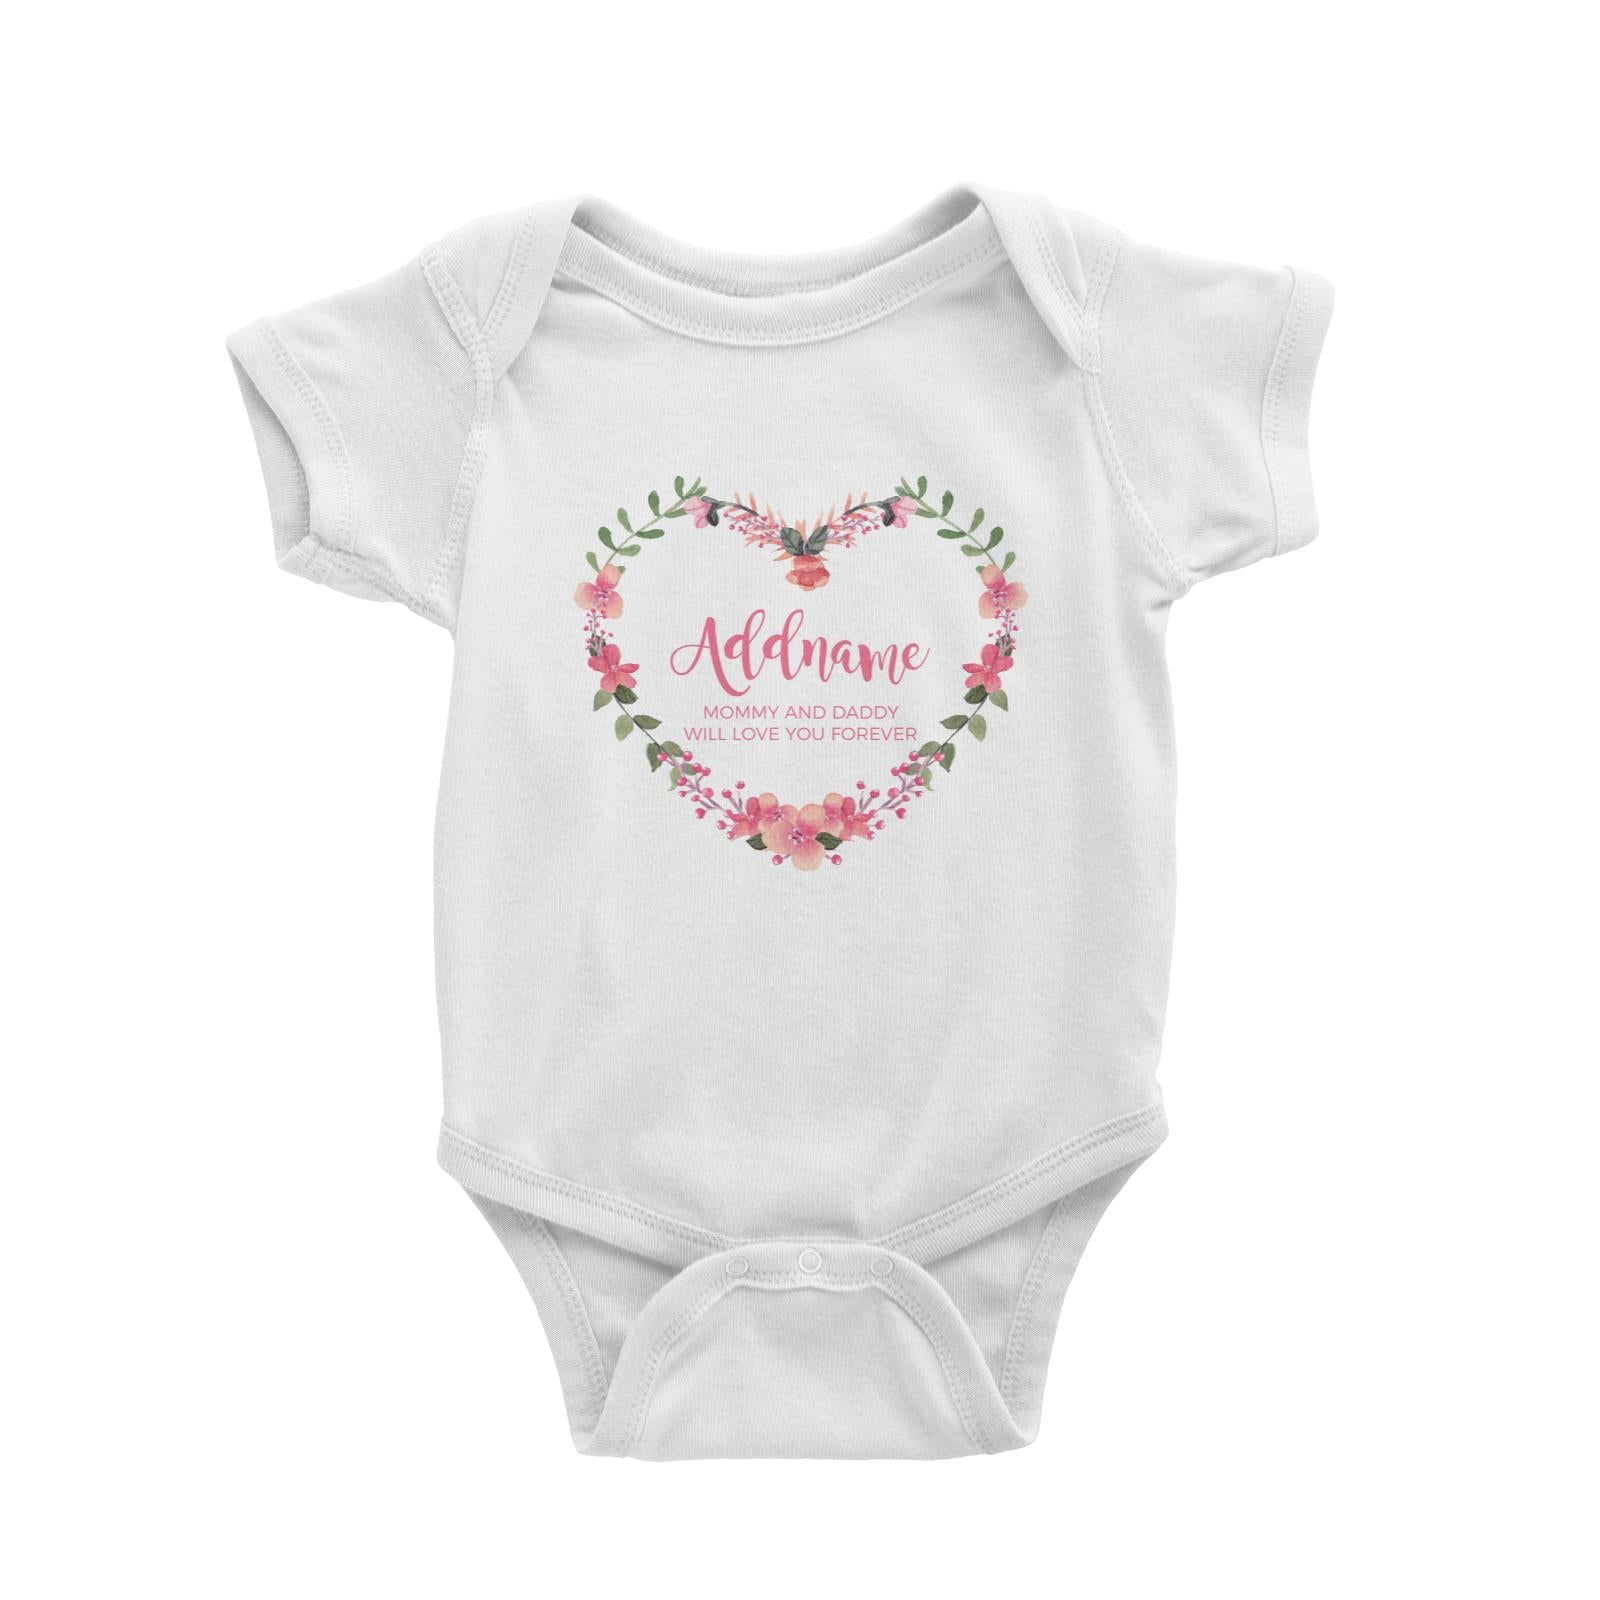 Pink Heart Shaped Flower Wreath Personalizable with Name and Text Baby Romper